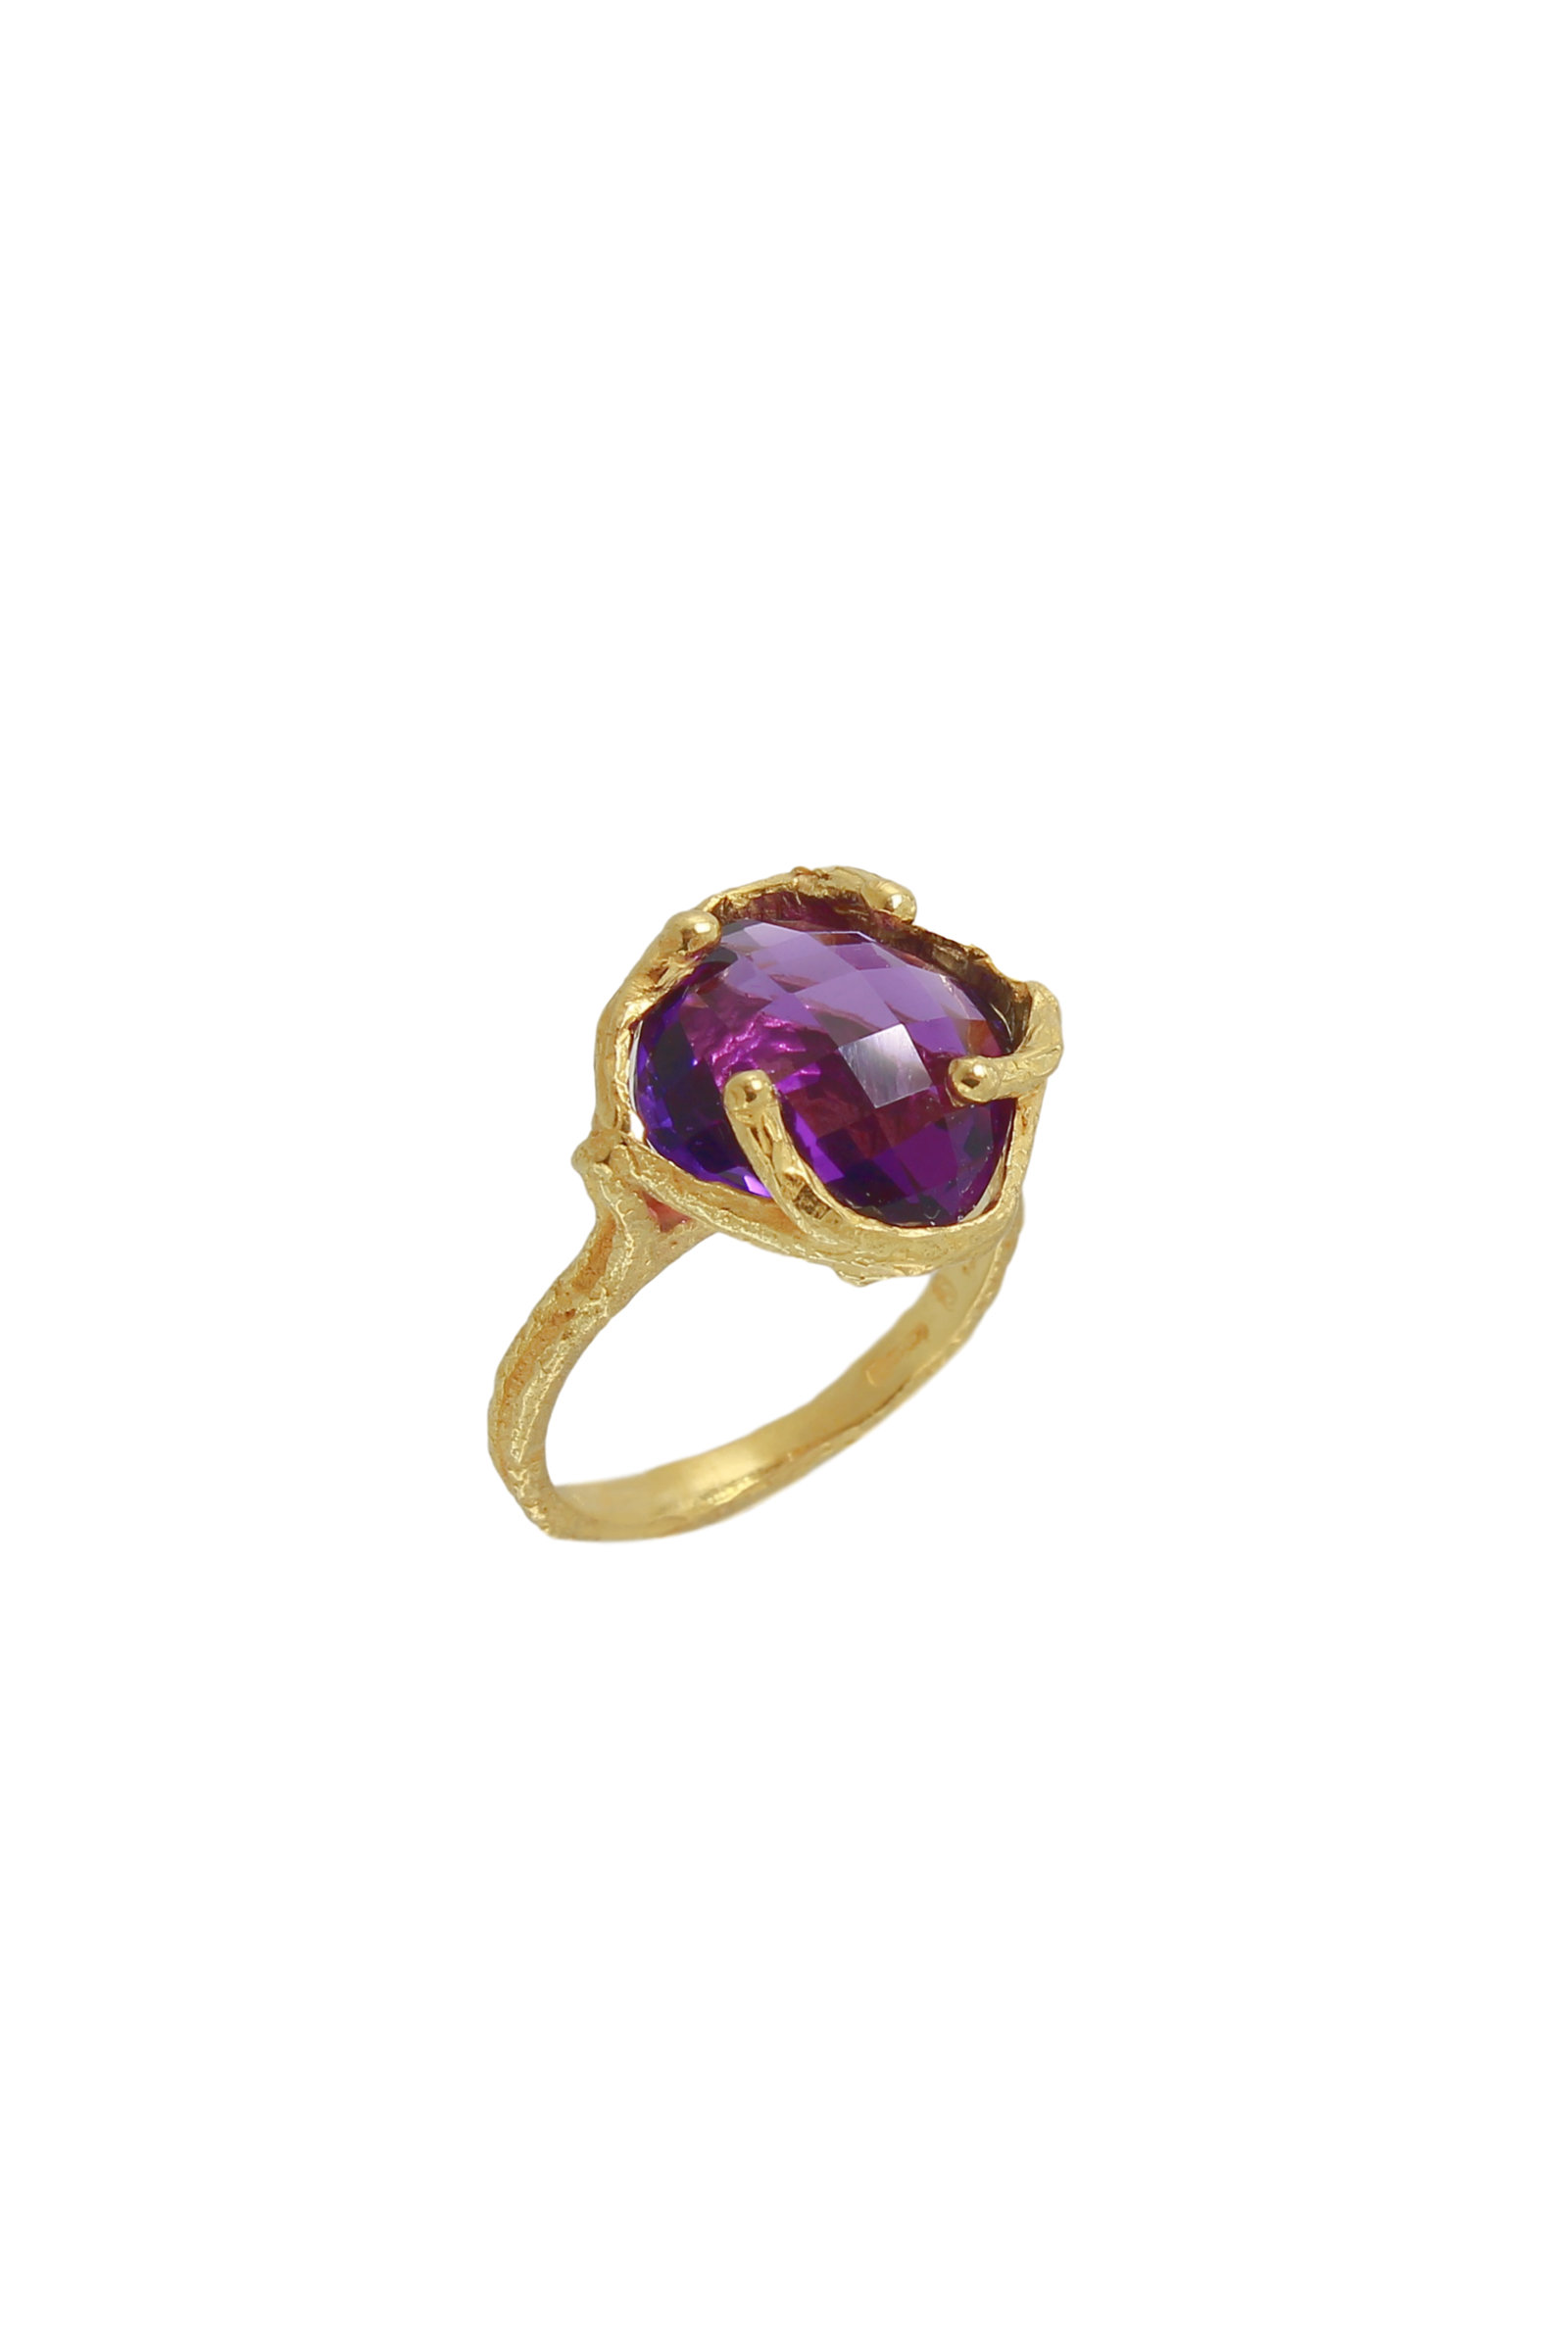 SE260B-18-Kt-Yellow-Gold-Ring-with-Purple-Amethyst-1